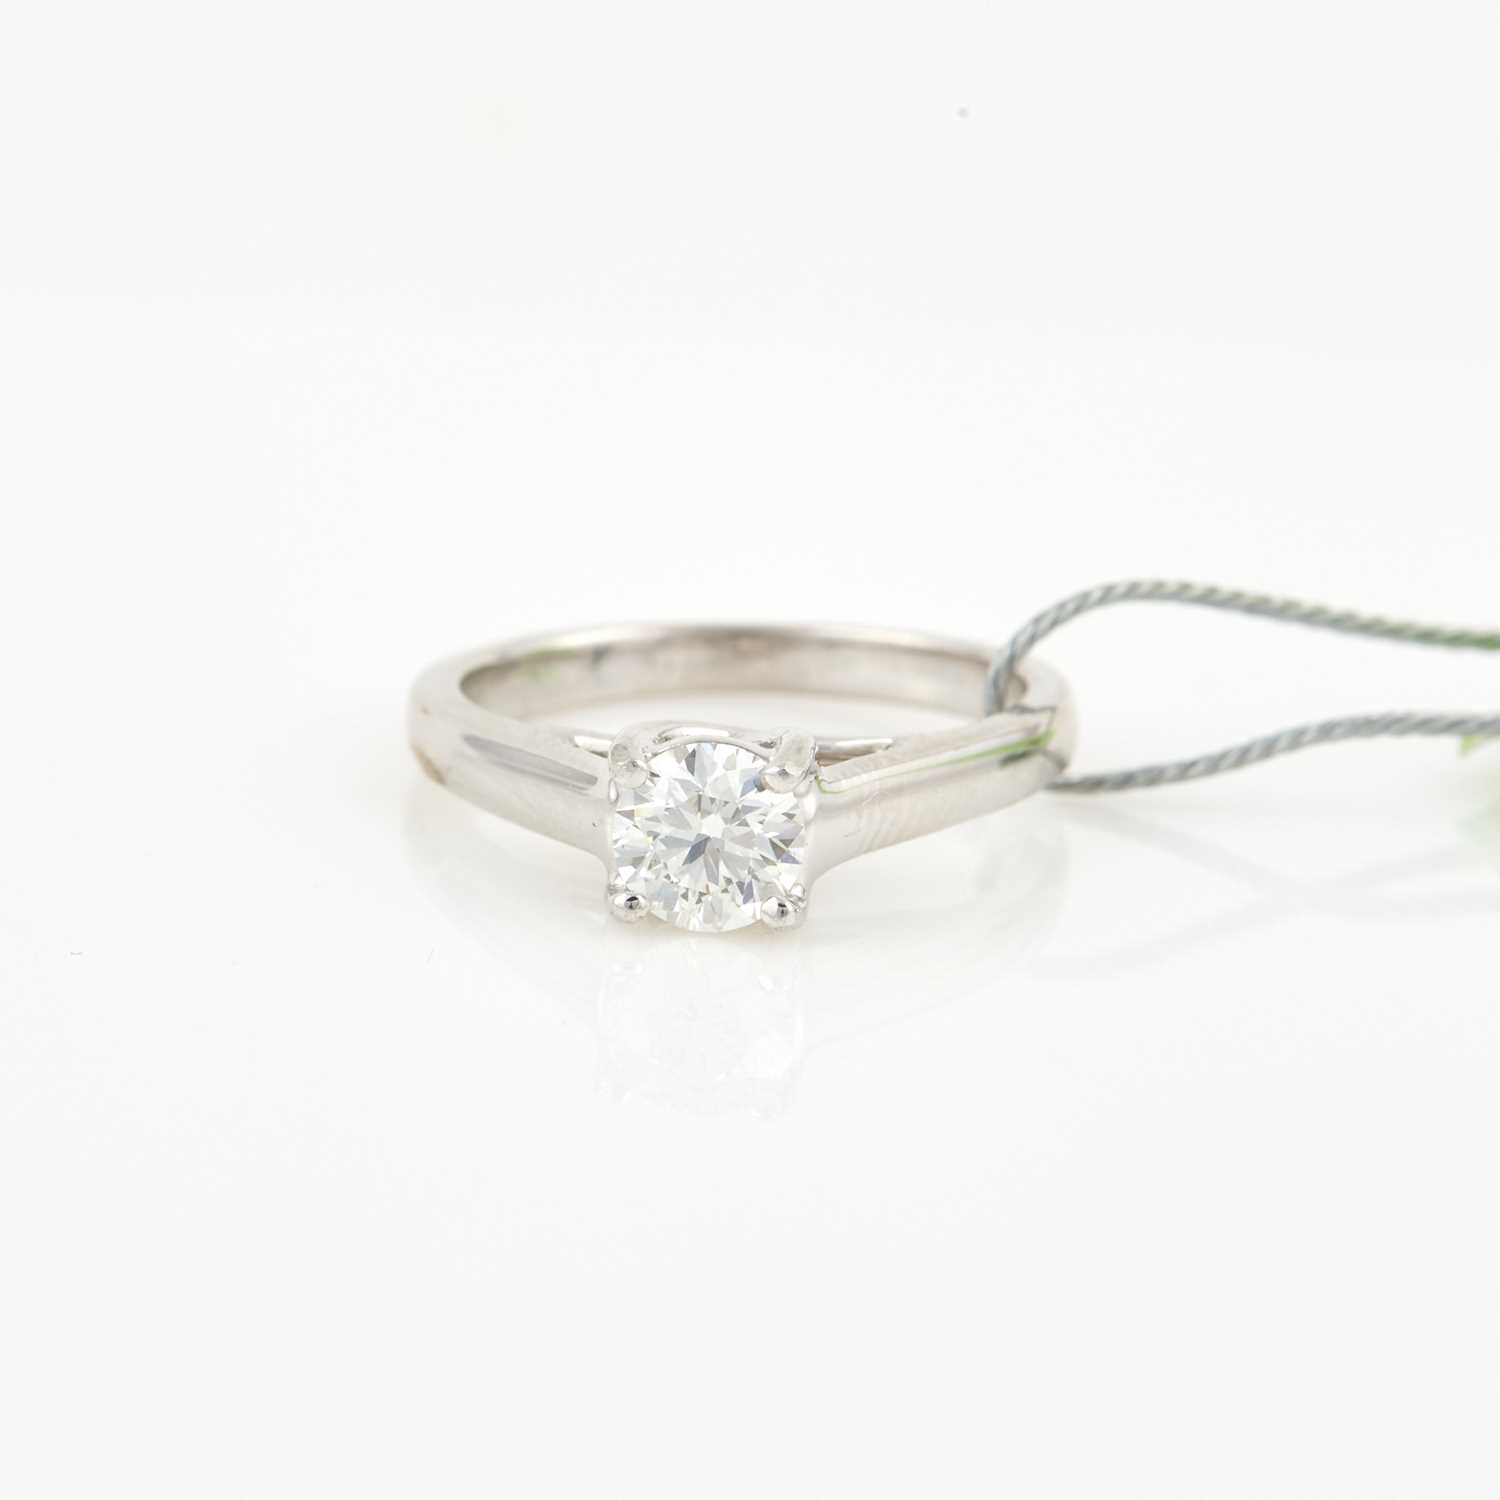 Lot 70 - Diamond Solitaire Ring about 0.80 ct., Platinum and 14K 2 dwt. all